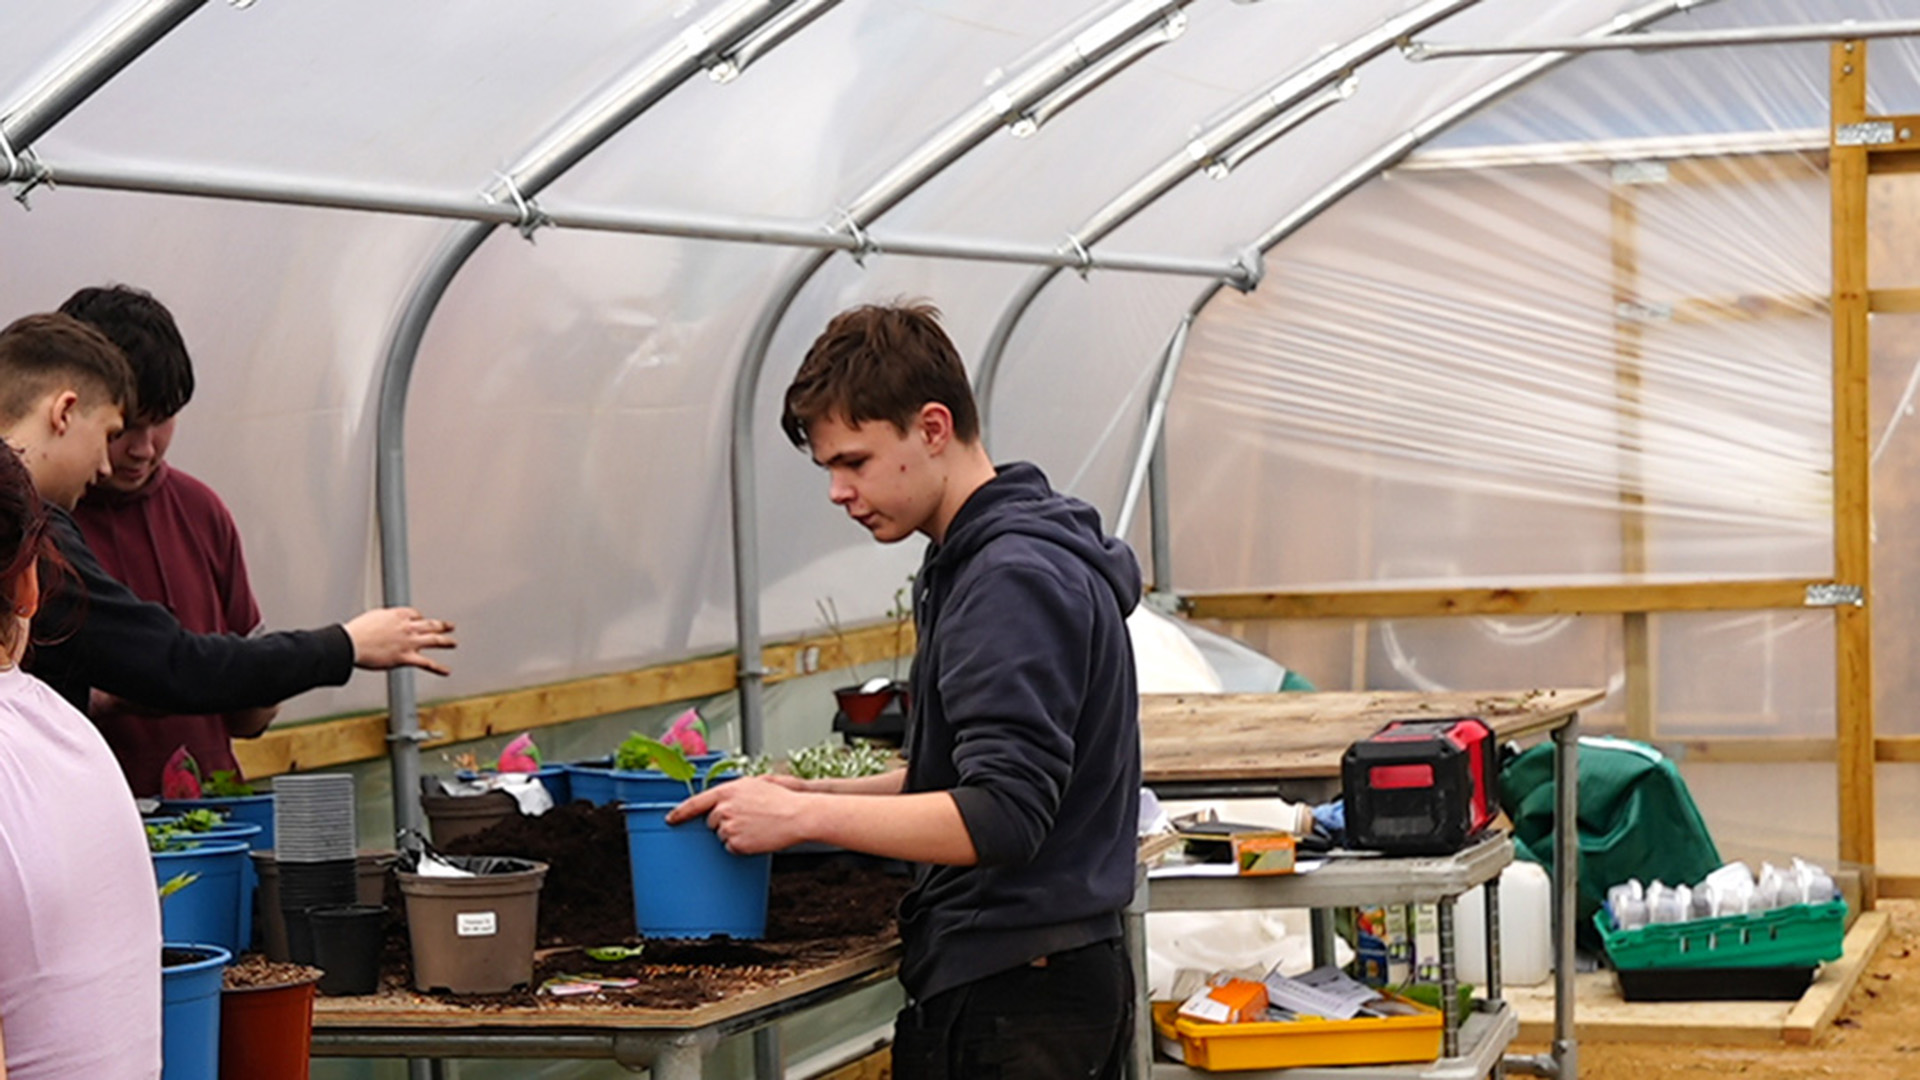 Year One T-level Horticulture Student Awarded Grant to Set Up Their Own Business